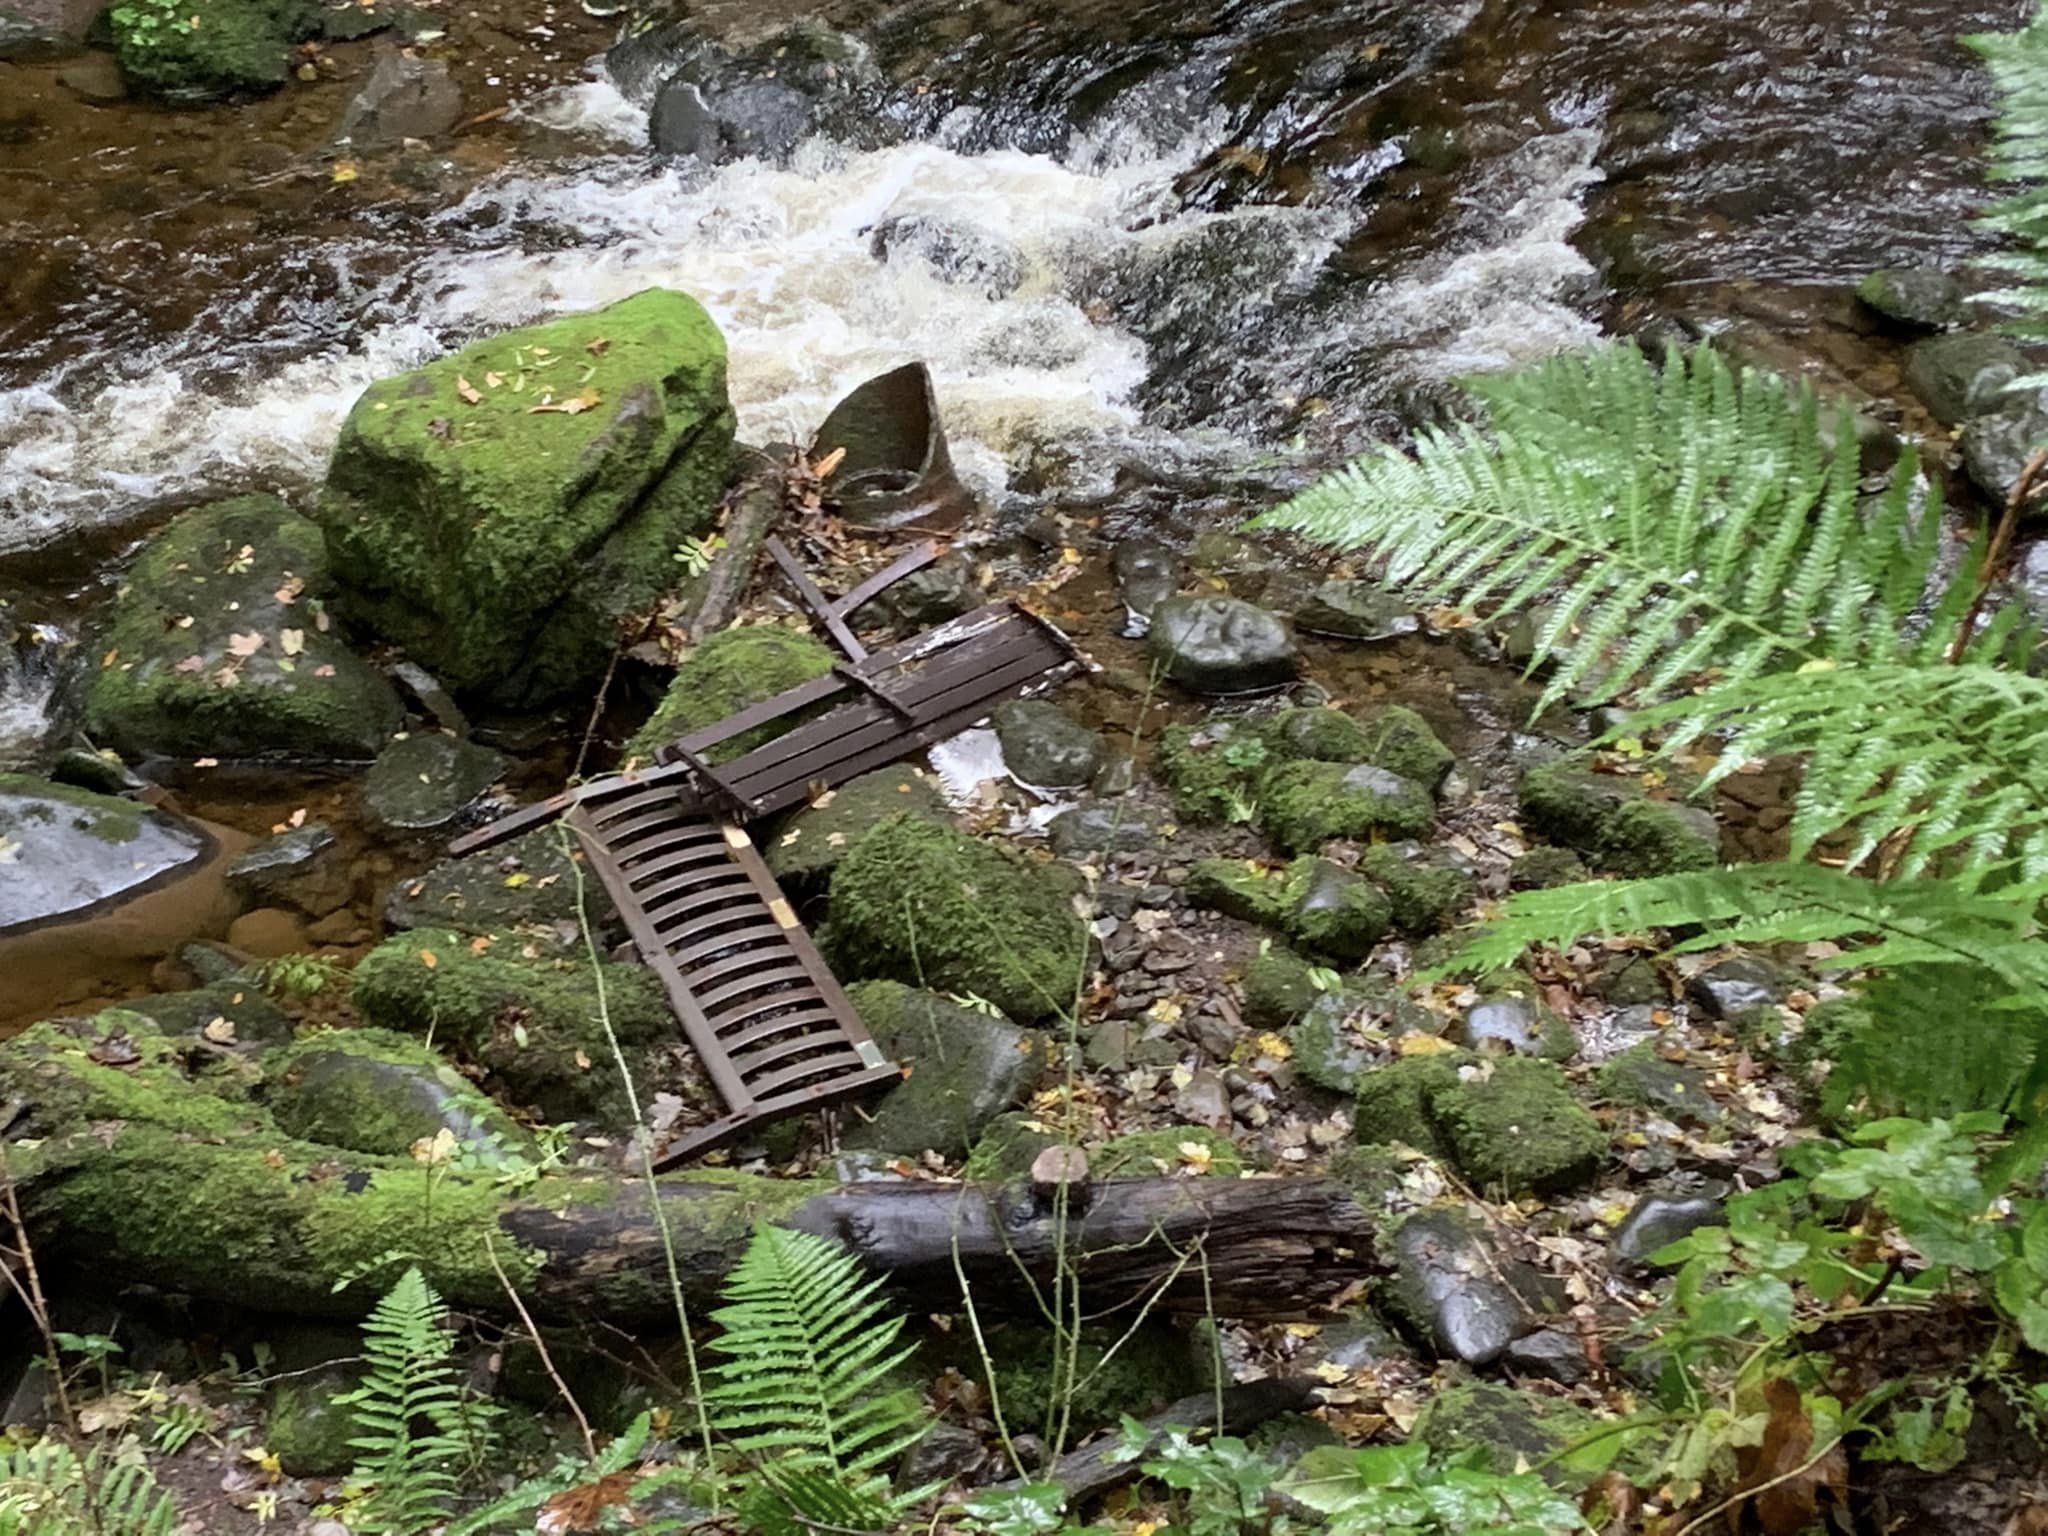 HEARTBREAK: The memorial bench was thrown into the burn below where it shattered into pieces on the rocks